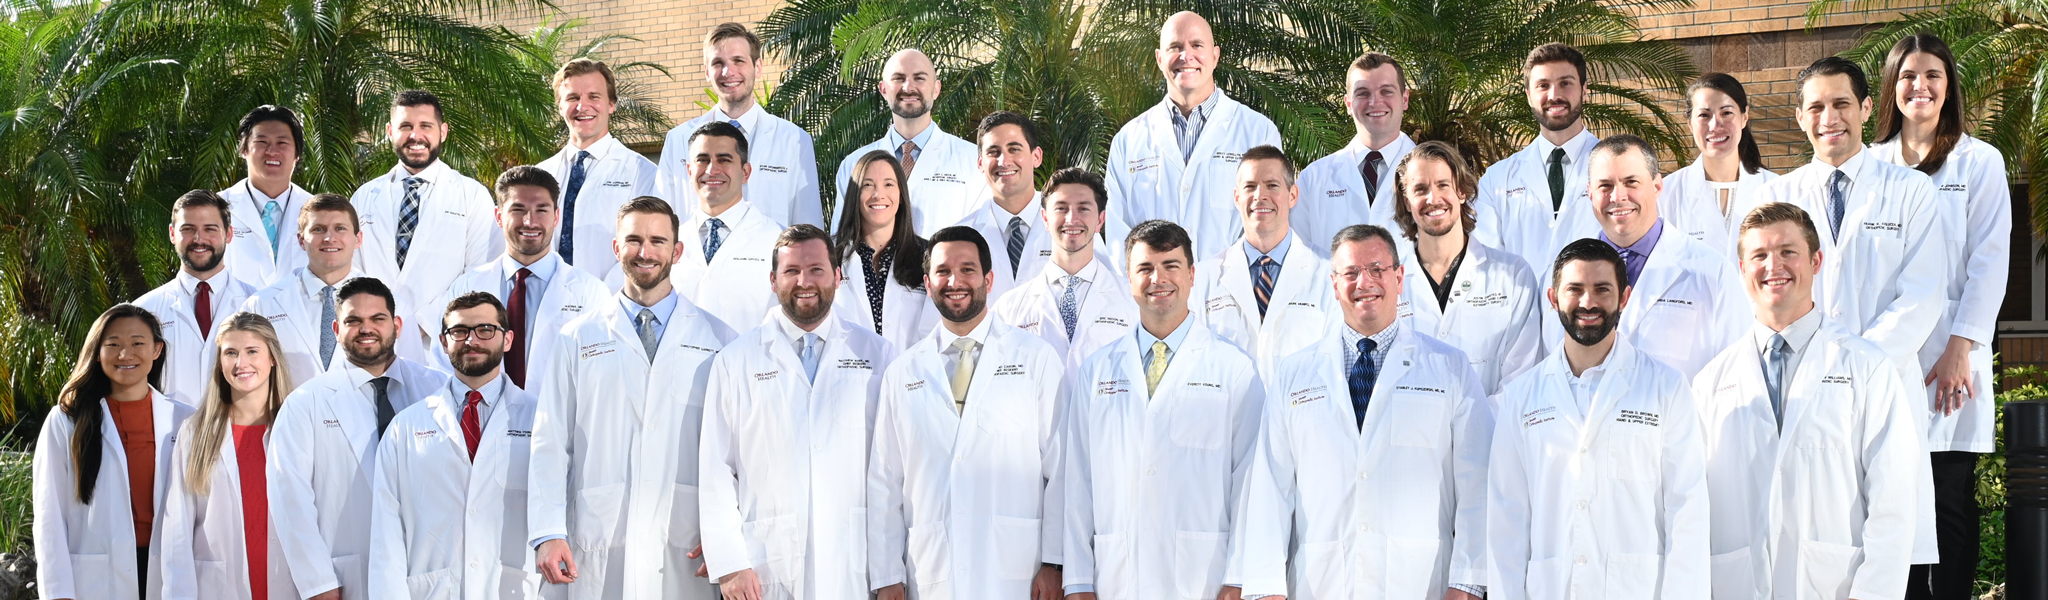 Orthopedic Residency Group Picture